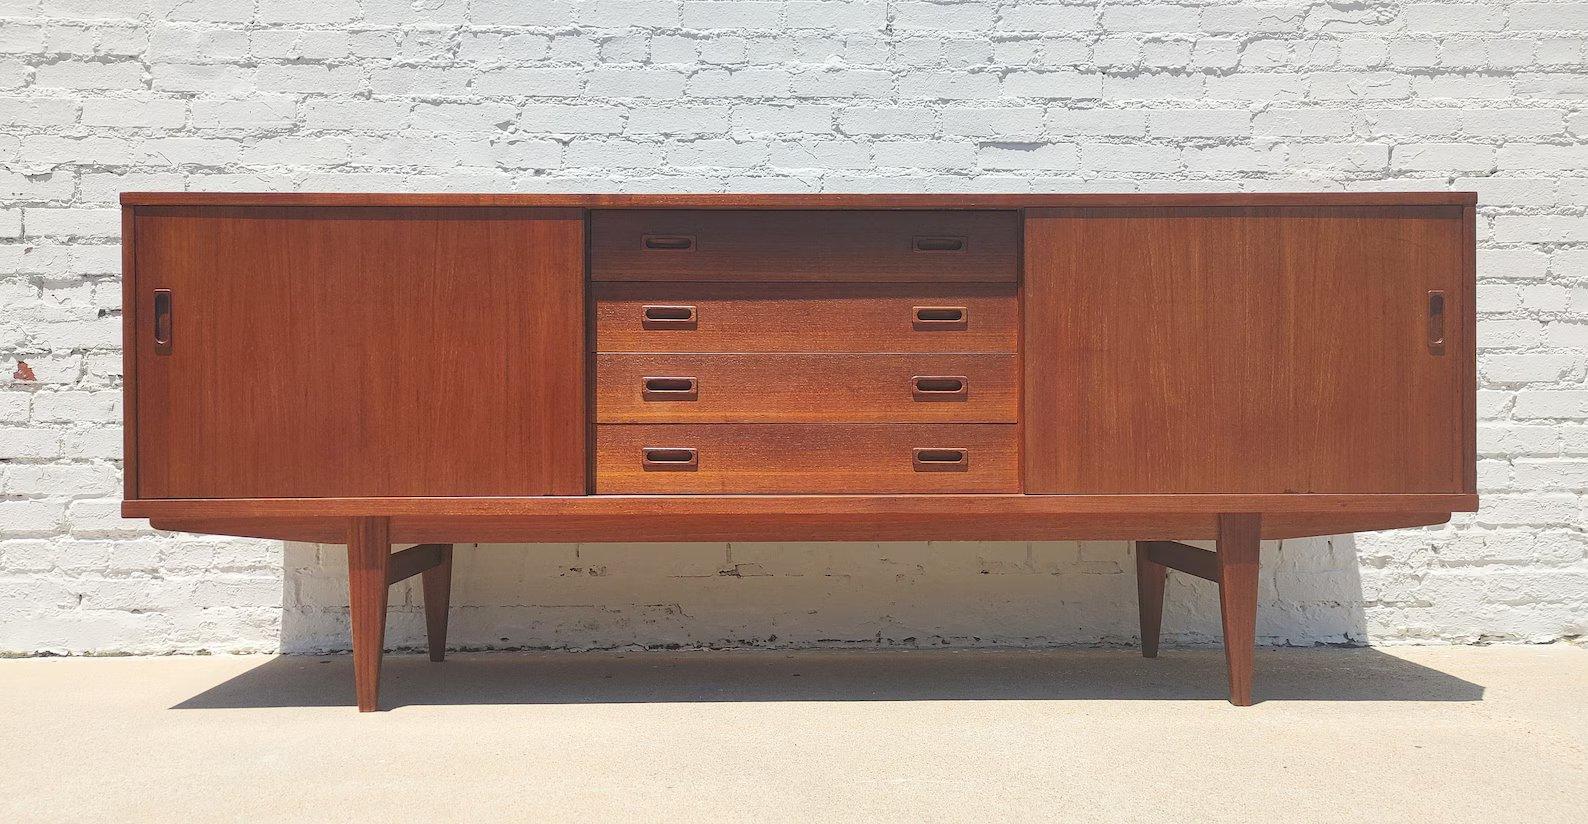 Mid Century Danish Modern Teak Sideboard
 
Above average vintage condition and structurally sound. Has some expected slight finish wear and scratching. Top has been refinished and does not have original factory finish. Outdoor listing pictures might